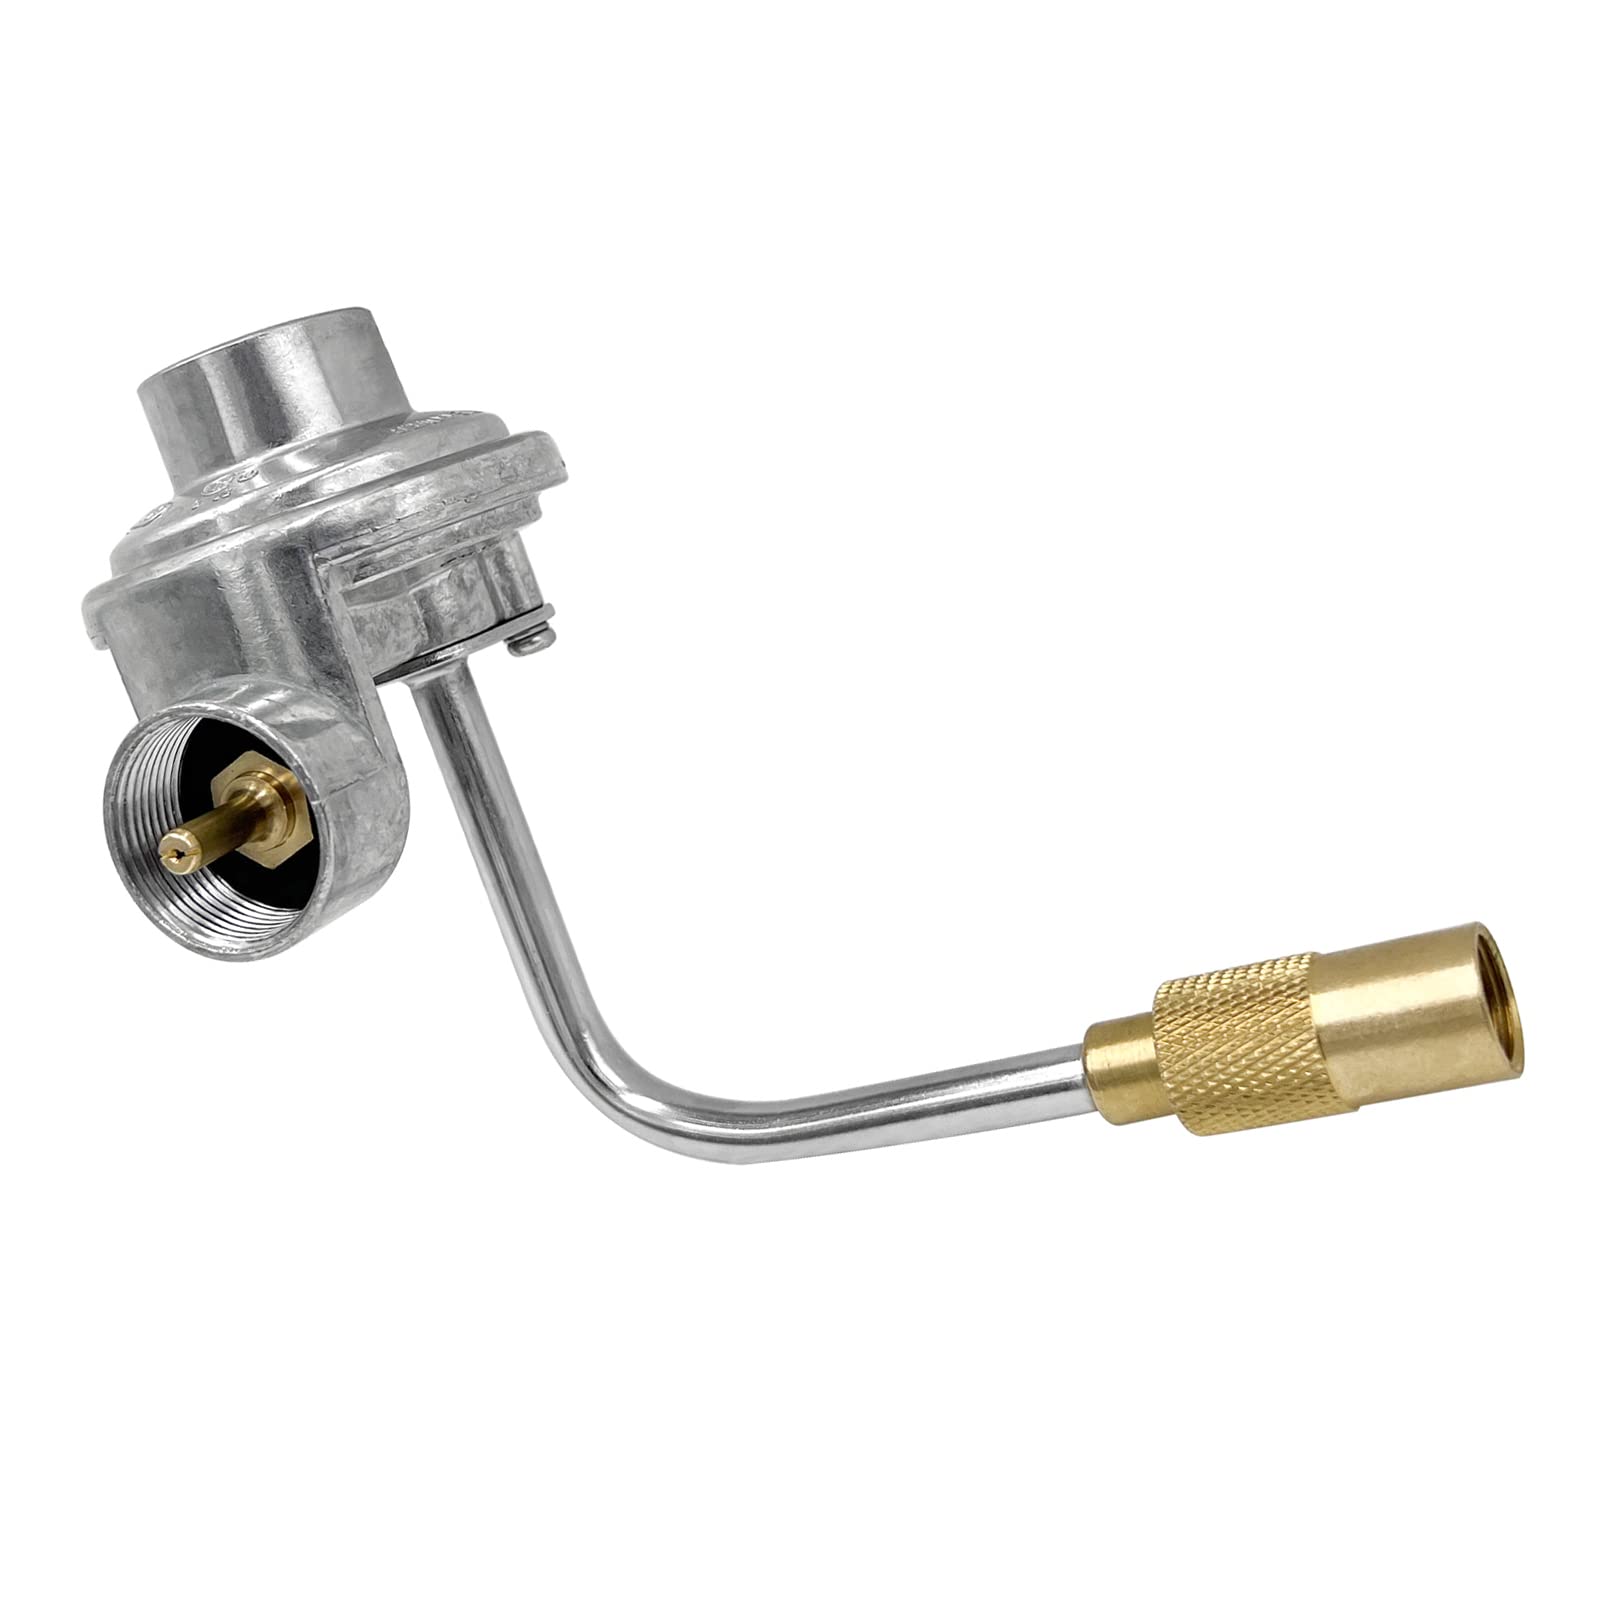 Griddle Regulator Fit for Blackstone & Pit Boss & Charbroil & Blue Rhino Griddles -YAOAWE